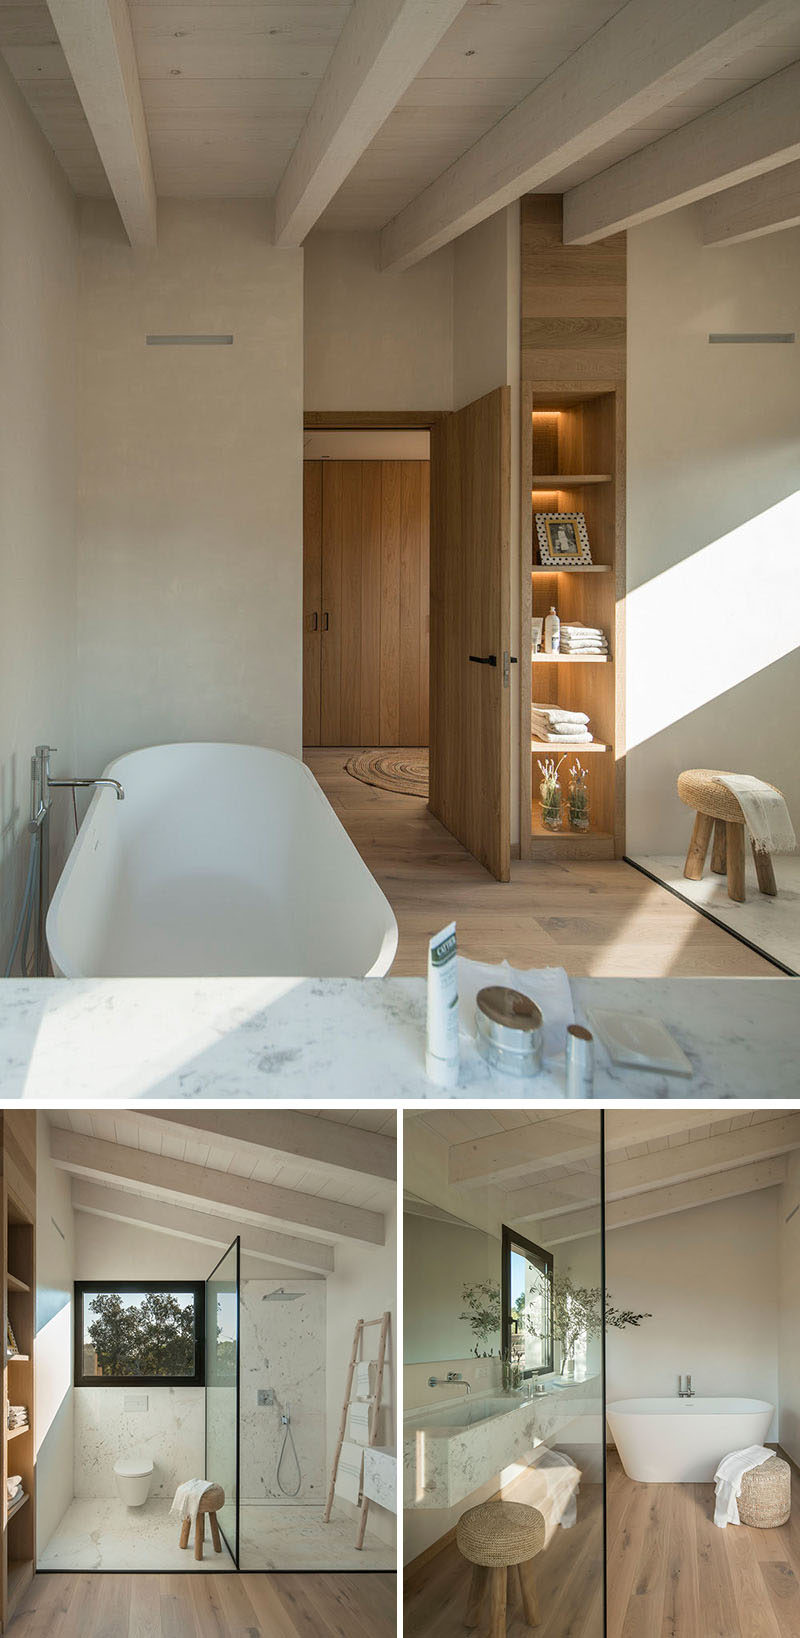 In this modern bathroom, built-in wood shelving with back-lighting provides a place to store bathroom items, while a freestanding bathtub sits against the wall. Opposite the bathtub is the toilet and shower that are separated by a glass shower screen, and next to the bathtub is a floating vanity. #ModernBathroom #BathroomDesign #WoodShelving